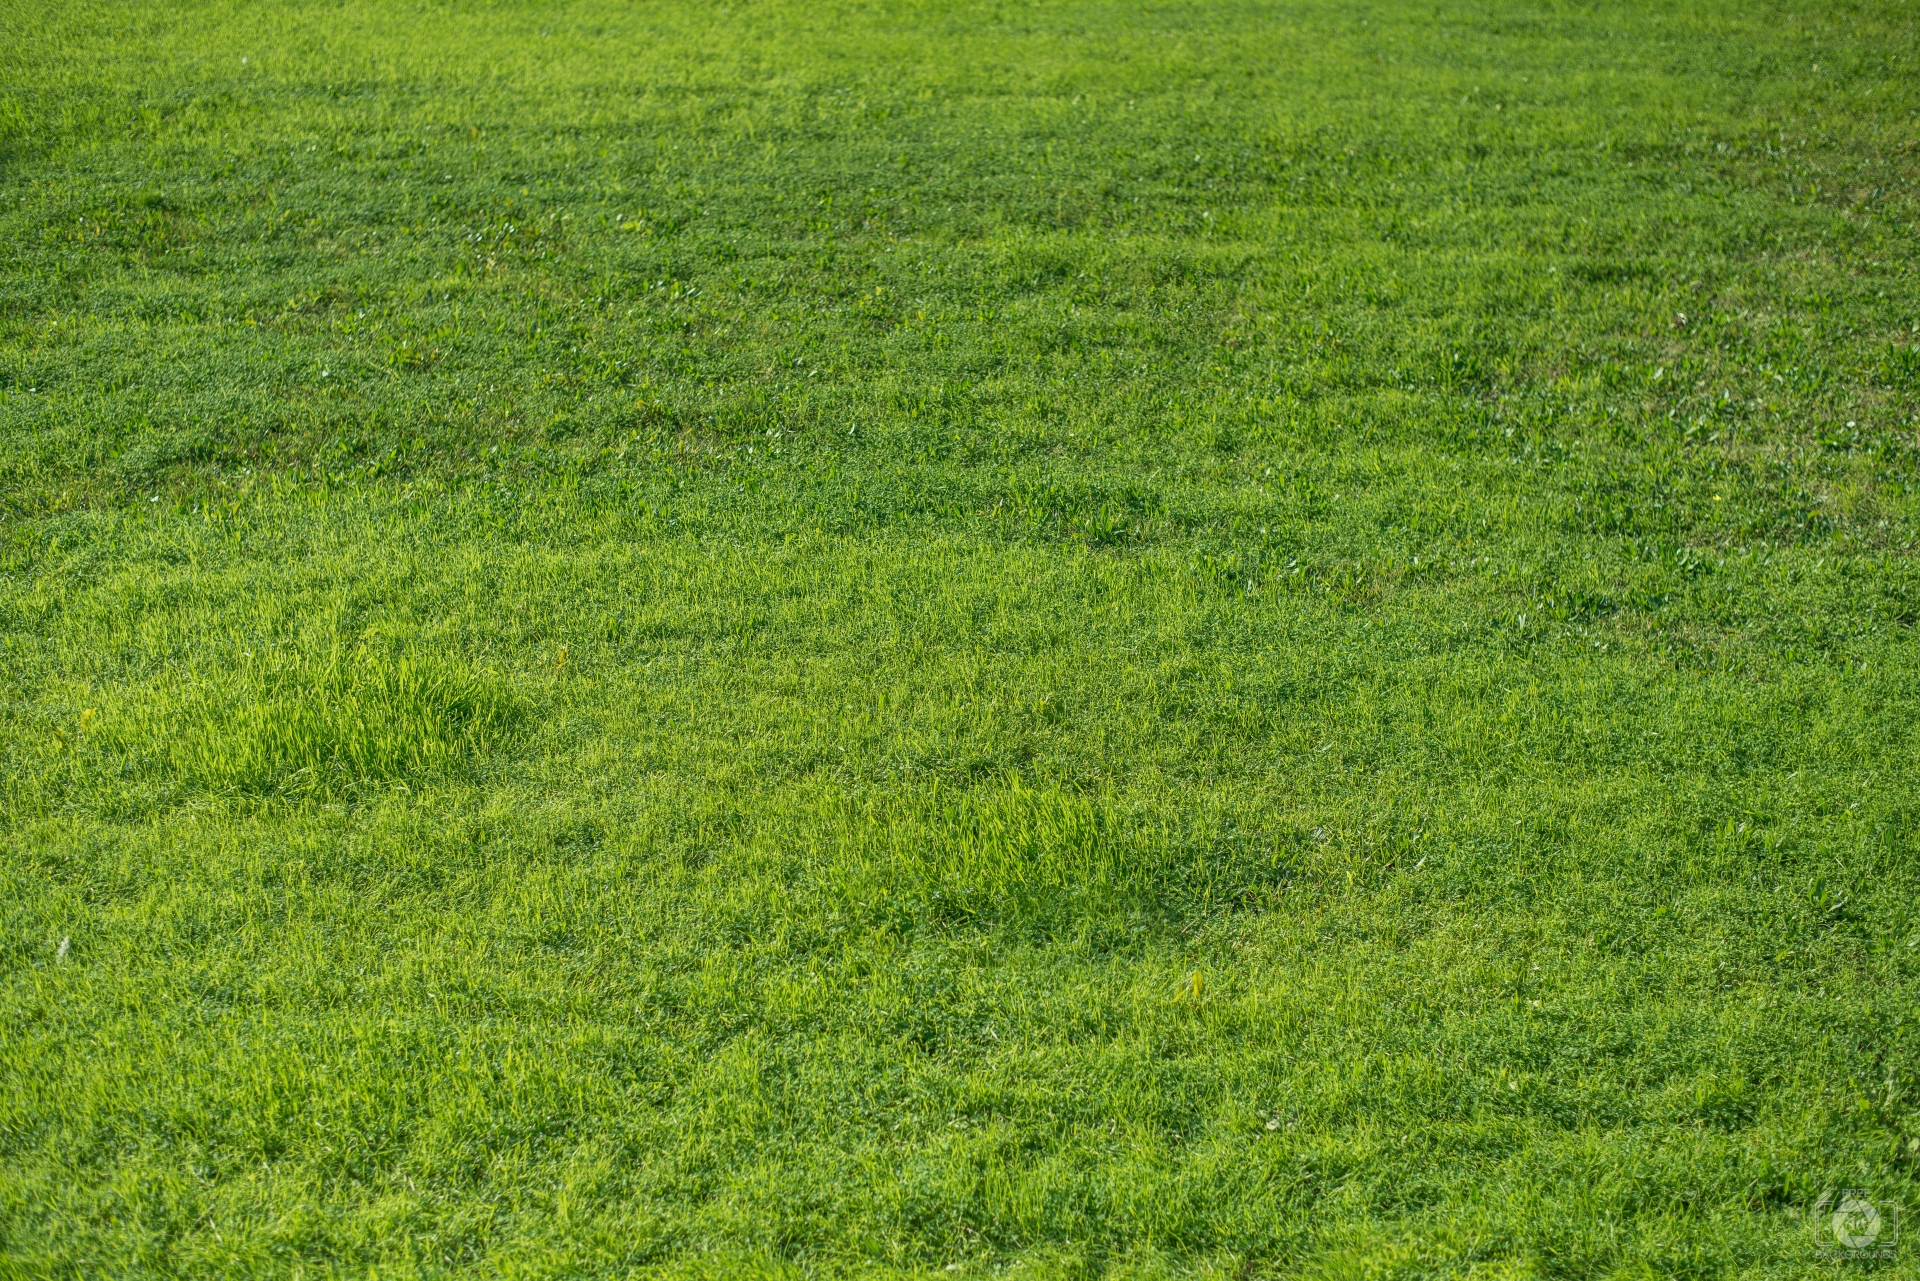 Green Grass Texture Quality Free Background